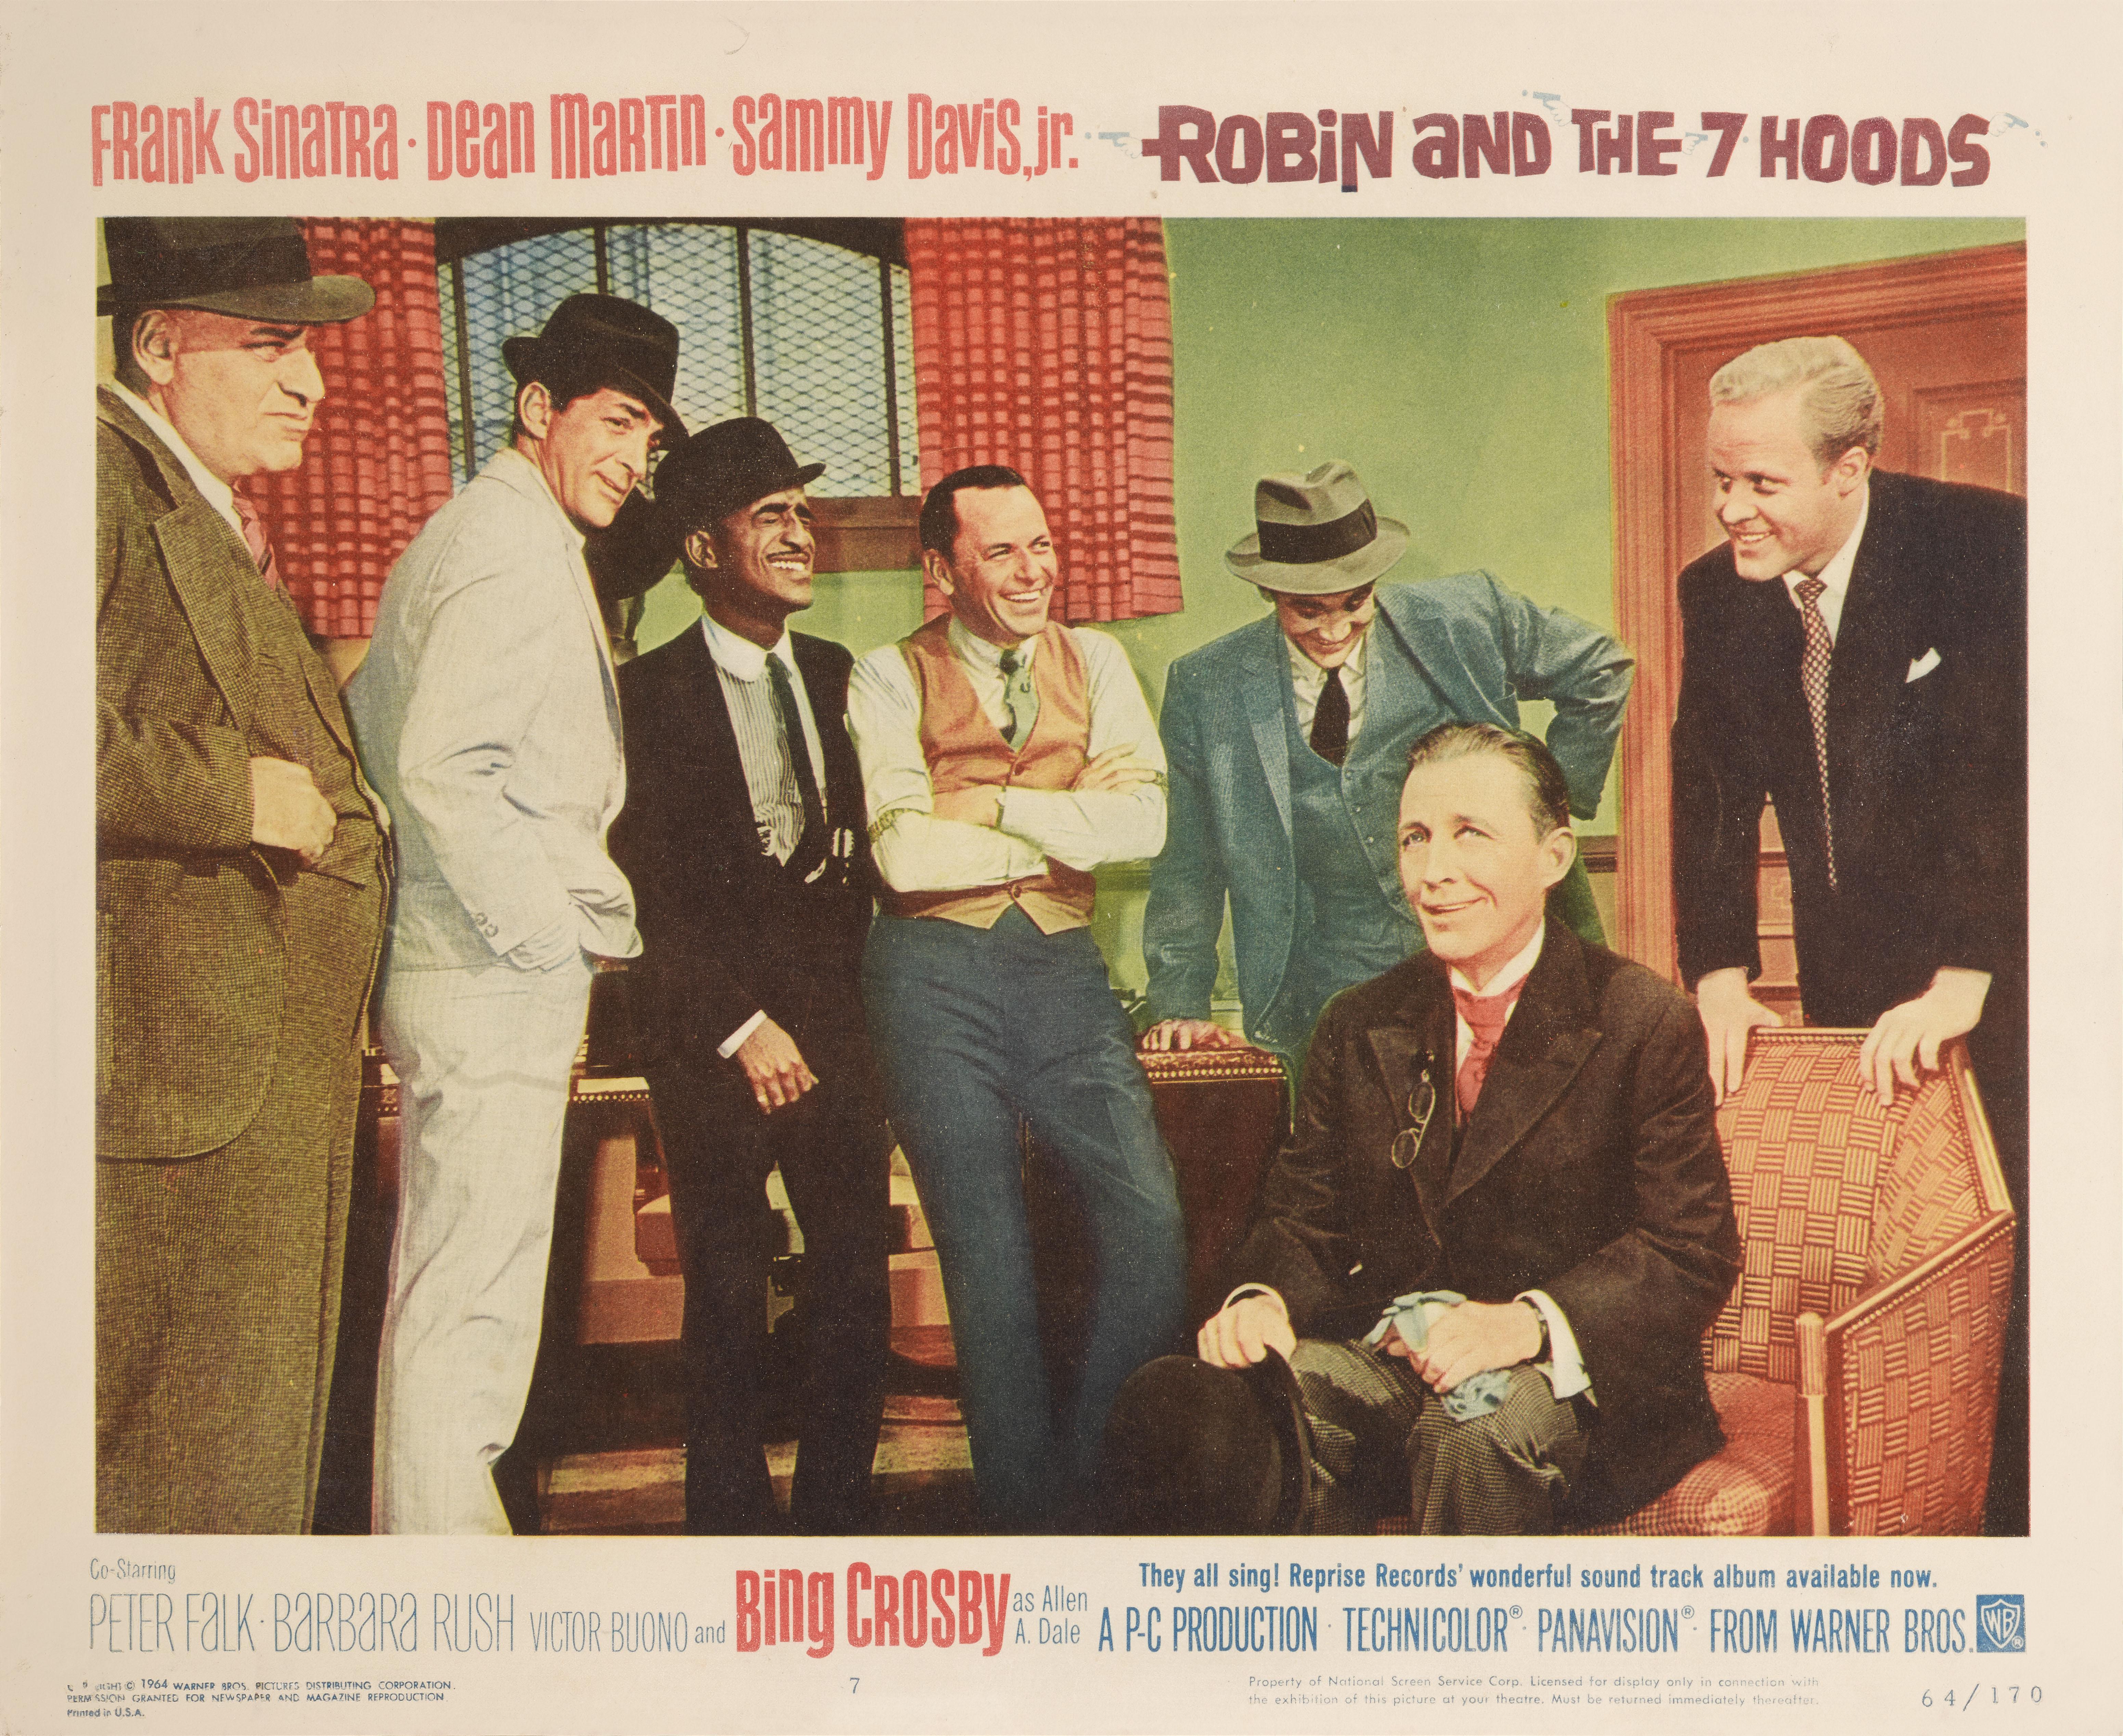 Original US lobby card number 6 for the American Musical comedy directed aGordon Douglas.The film starred Frank Sinatra, Dean Martin, Bing Crosby, Sammy Davis Jr., Peter Falk. This is the best card from the US set of 8 lobby cards.
This piece would